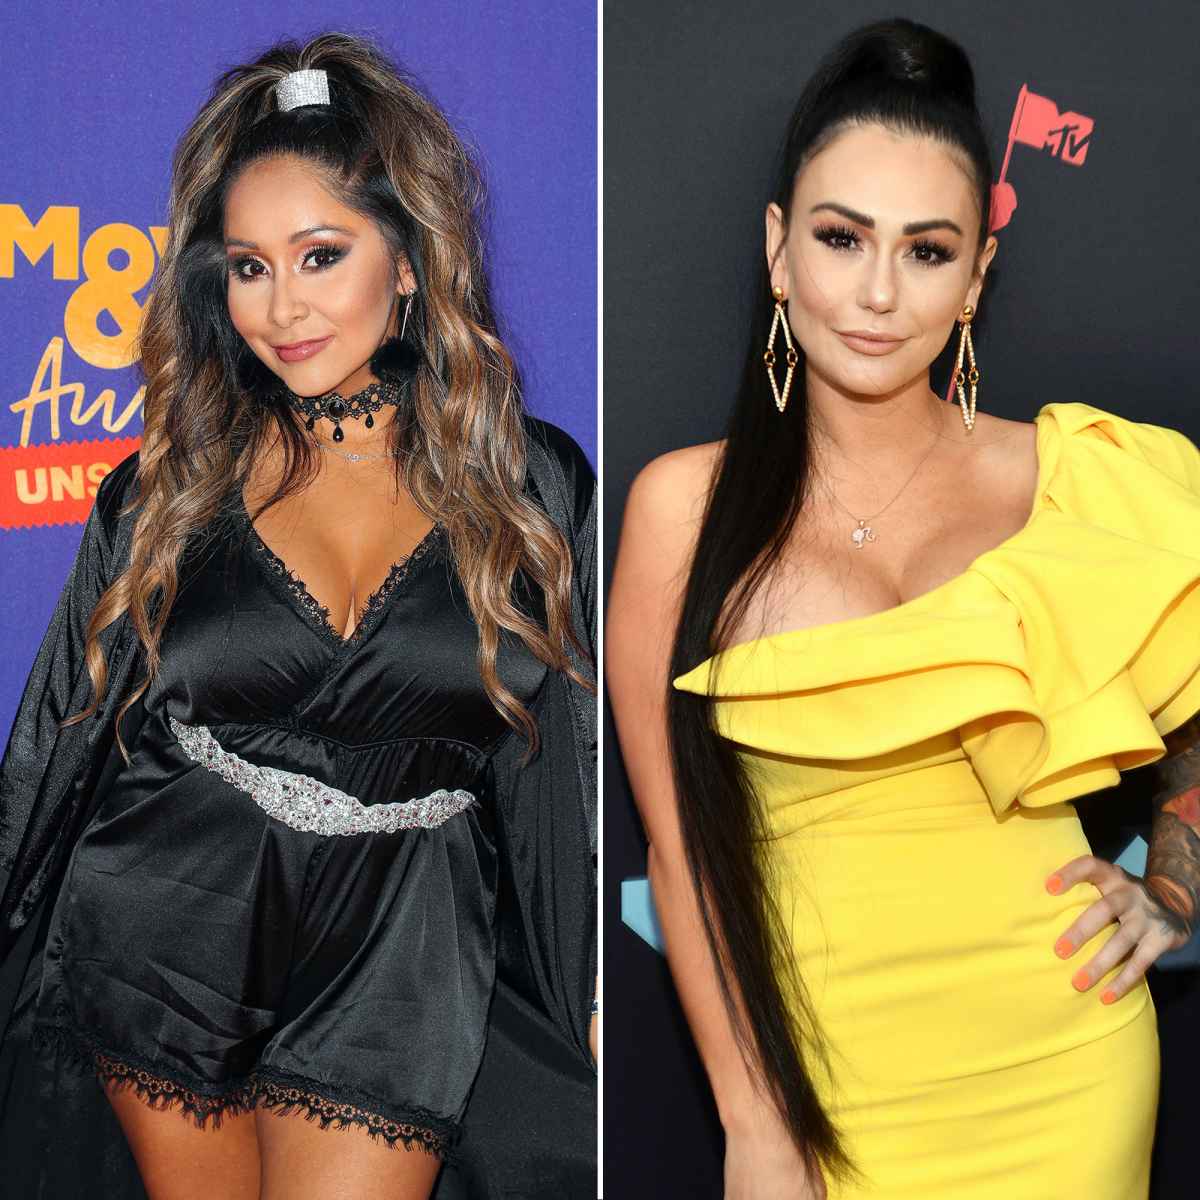 Why We're Still So Grateful for Snooki and JWoww's Friendship